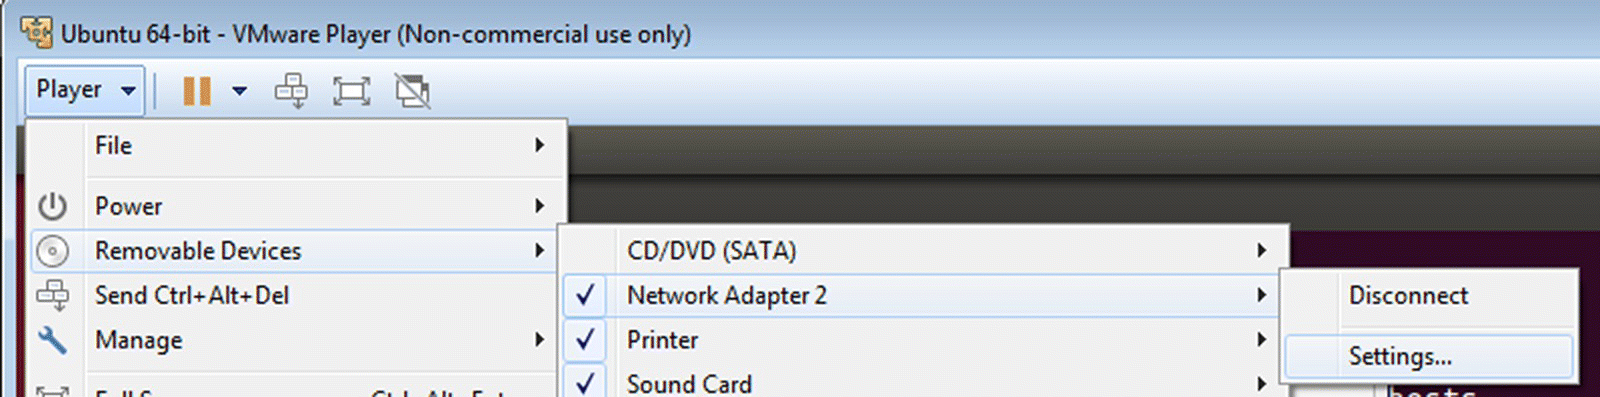 Ubuntu 64-bit-VMware Player (non-commercial use only) window displaying the items under player and items under removable devices such as CD/DVD (SATA), network adapter 2, and printer.